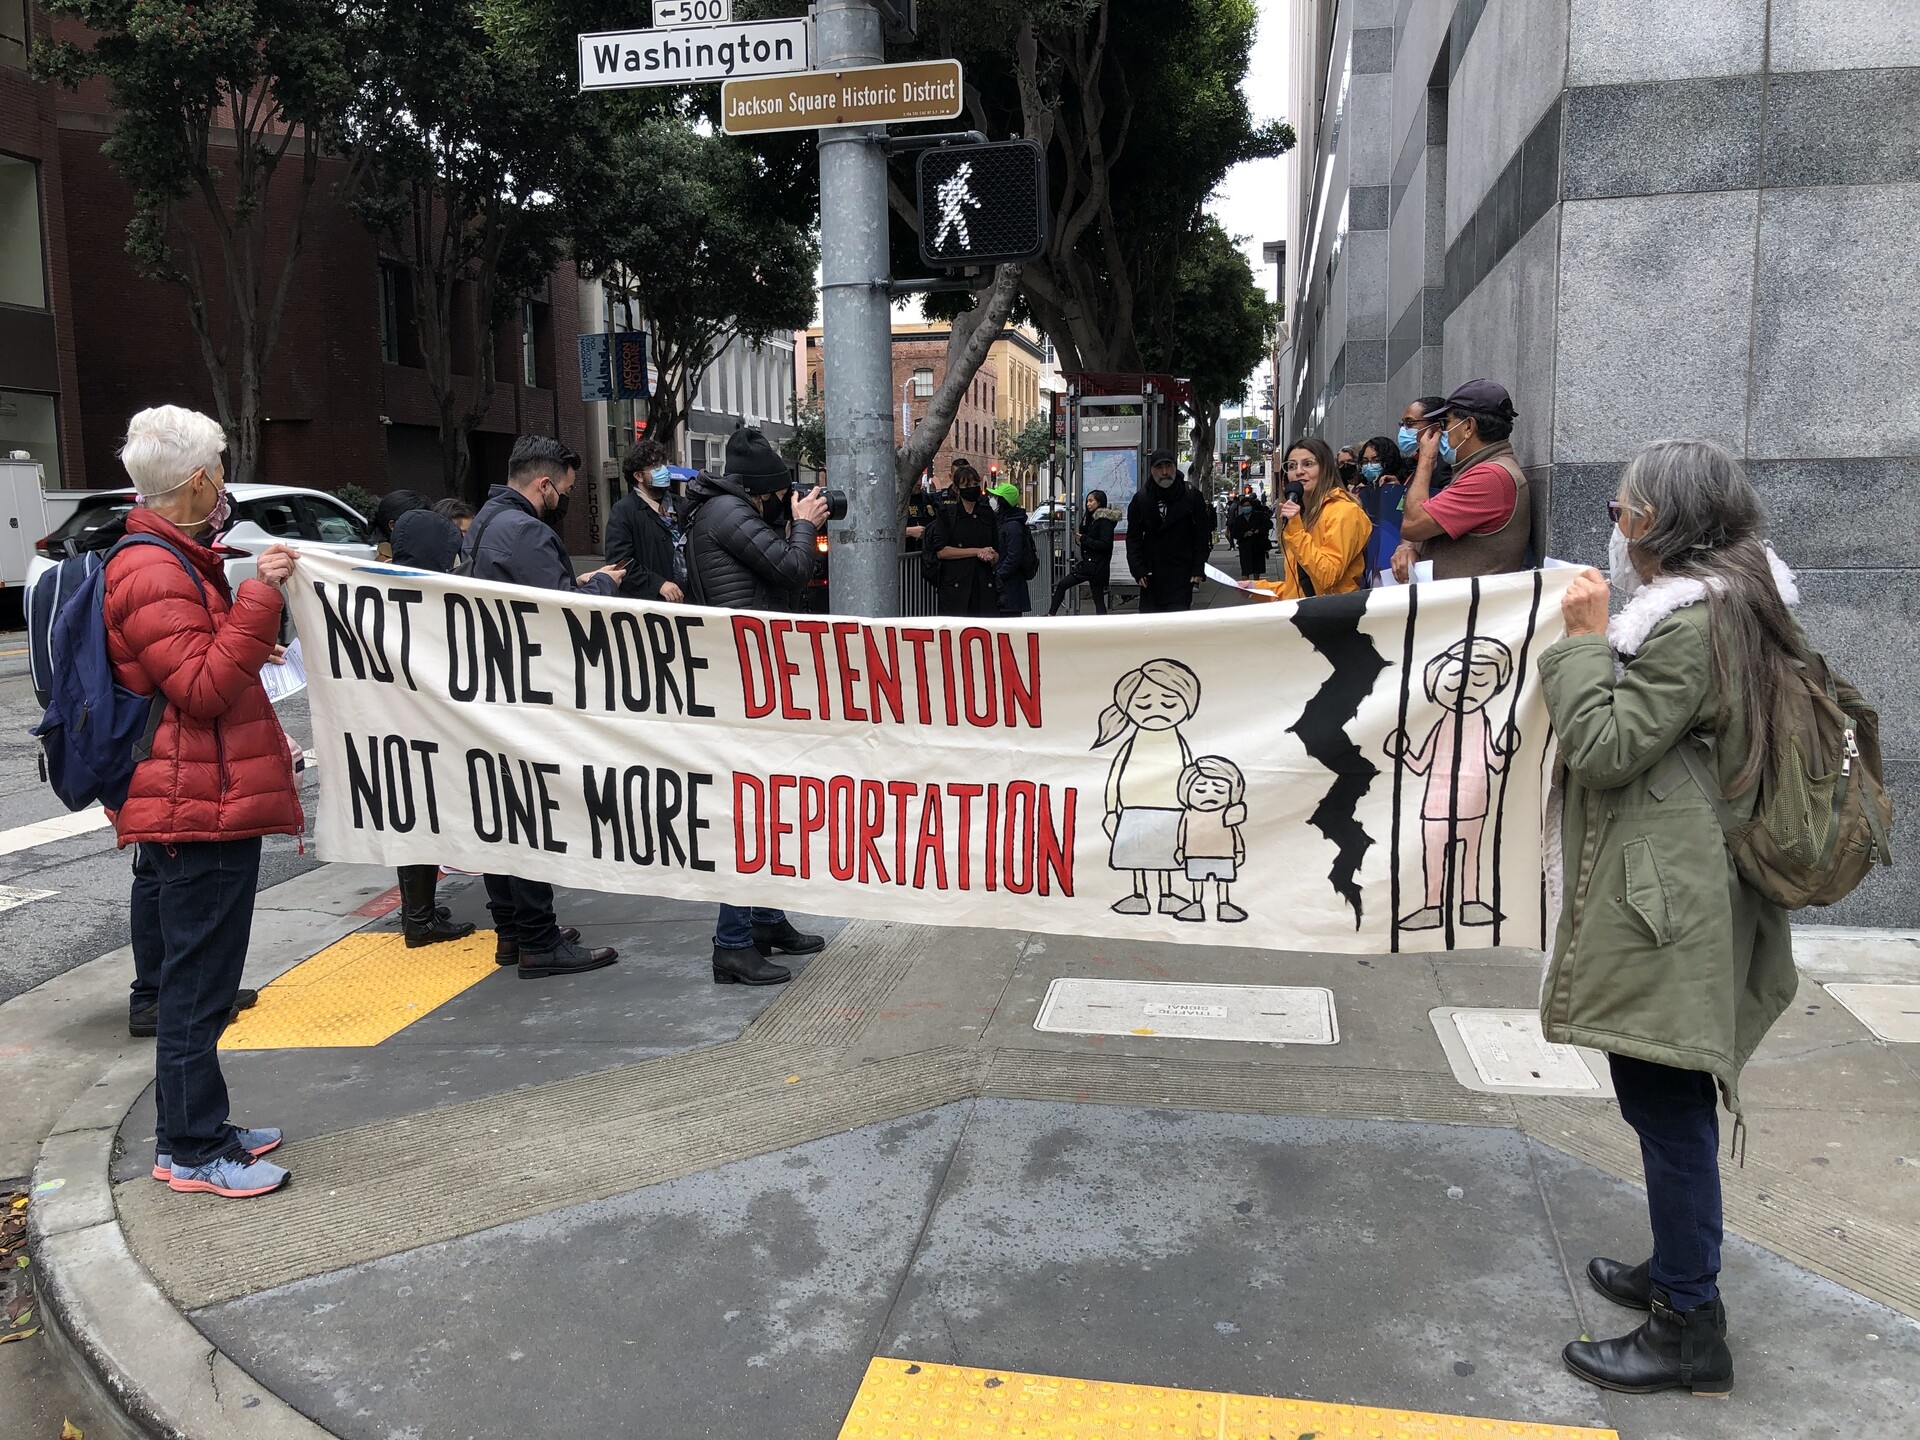 Protesters on street hold a banner that reads "Not One More Detention, Not One More Deportation"